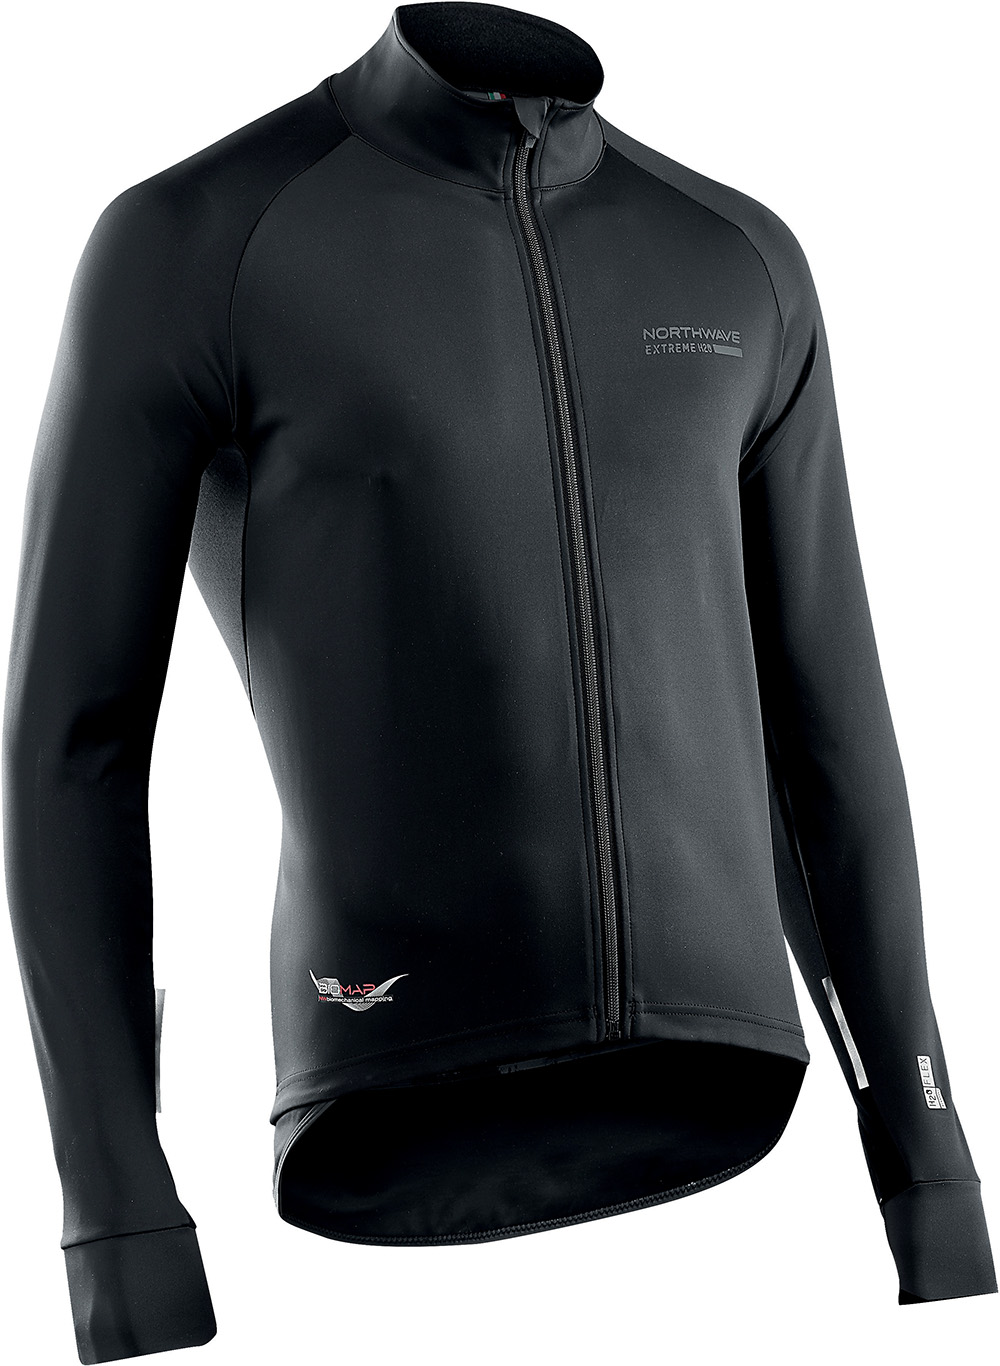 Giacca Ciclismo Maniche Lunghe Northwave Extreme H20 Jacket Short Sleeves BLACK